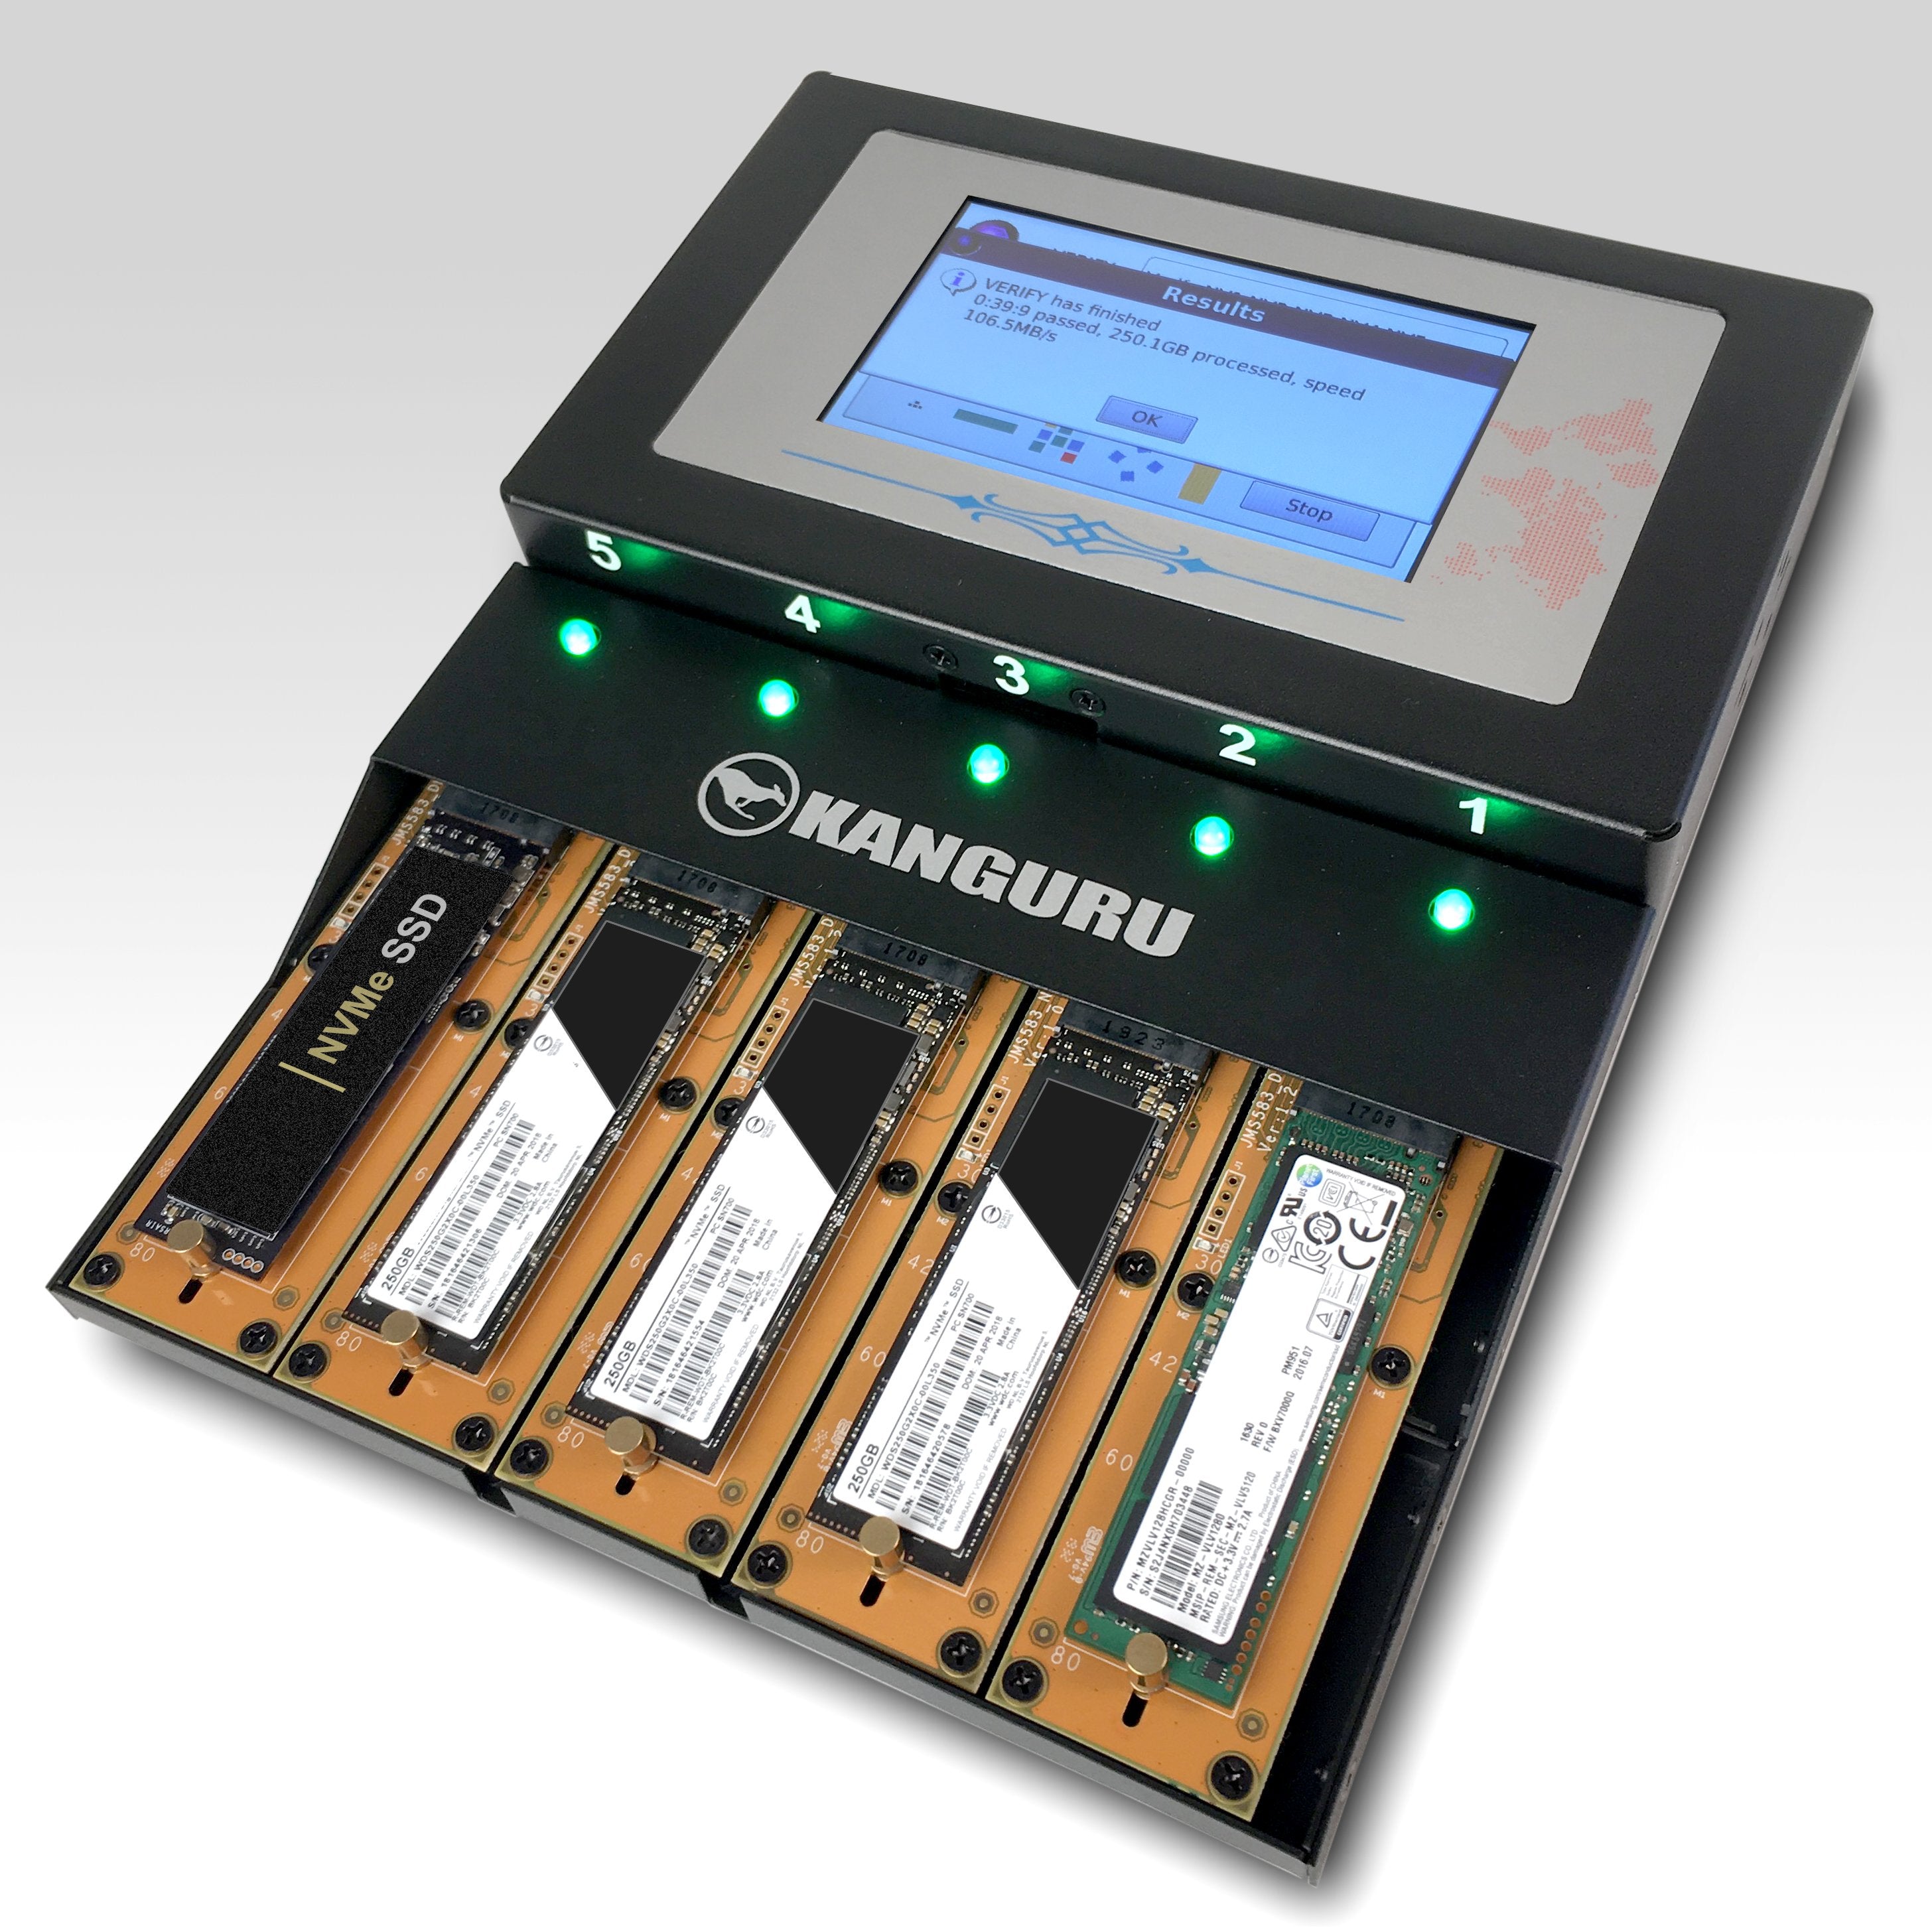 The new KanguruClone 4 M.2 NVMe SSD Duplicator can clone up to 4 NVMe SSDs at one time